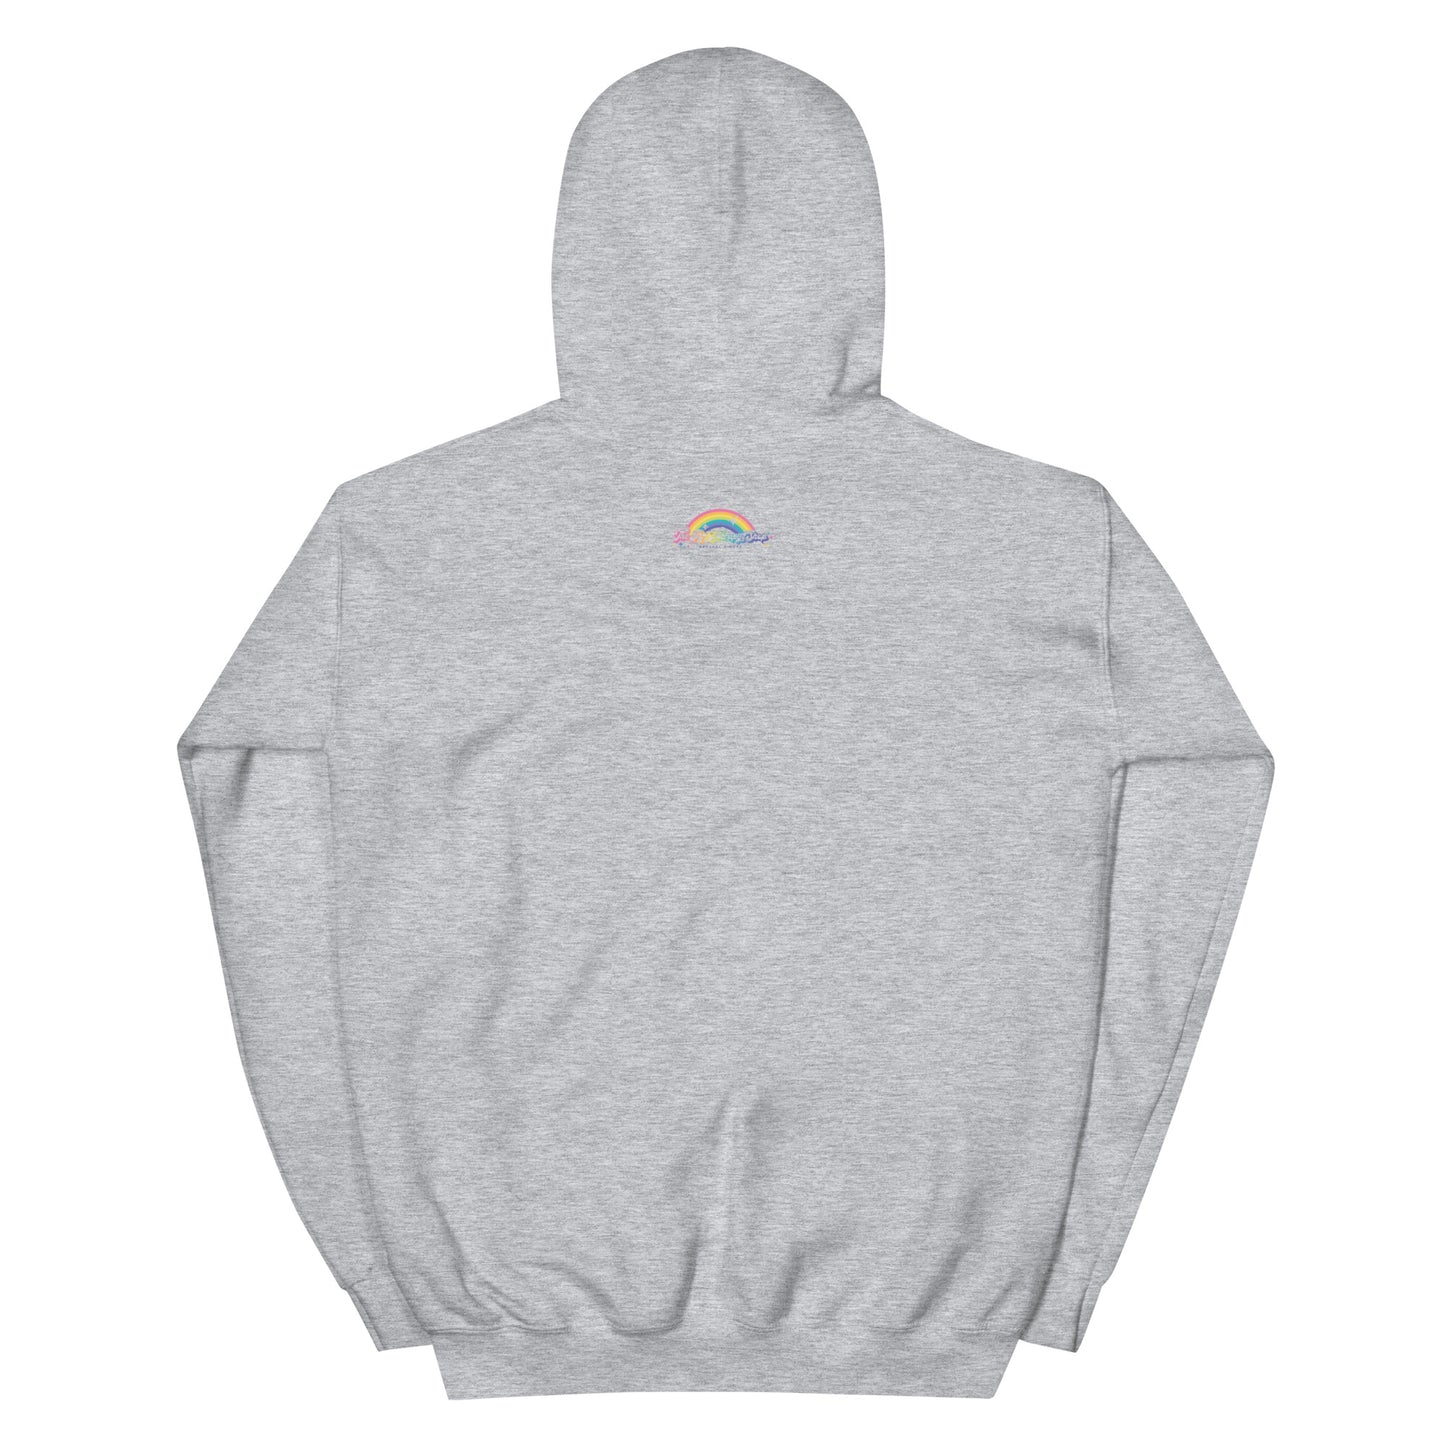 Express Yourself Hoodie